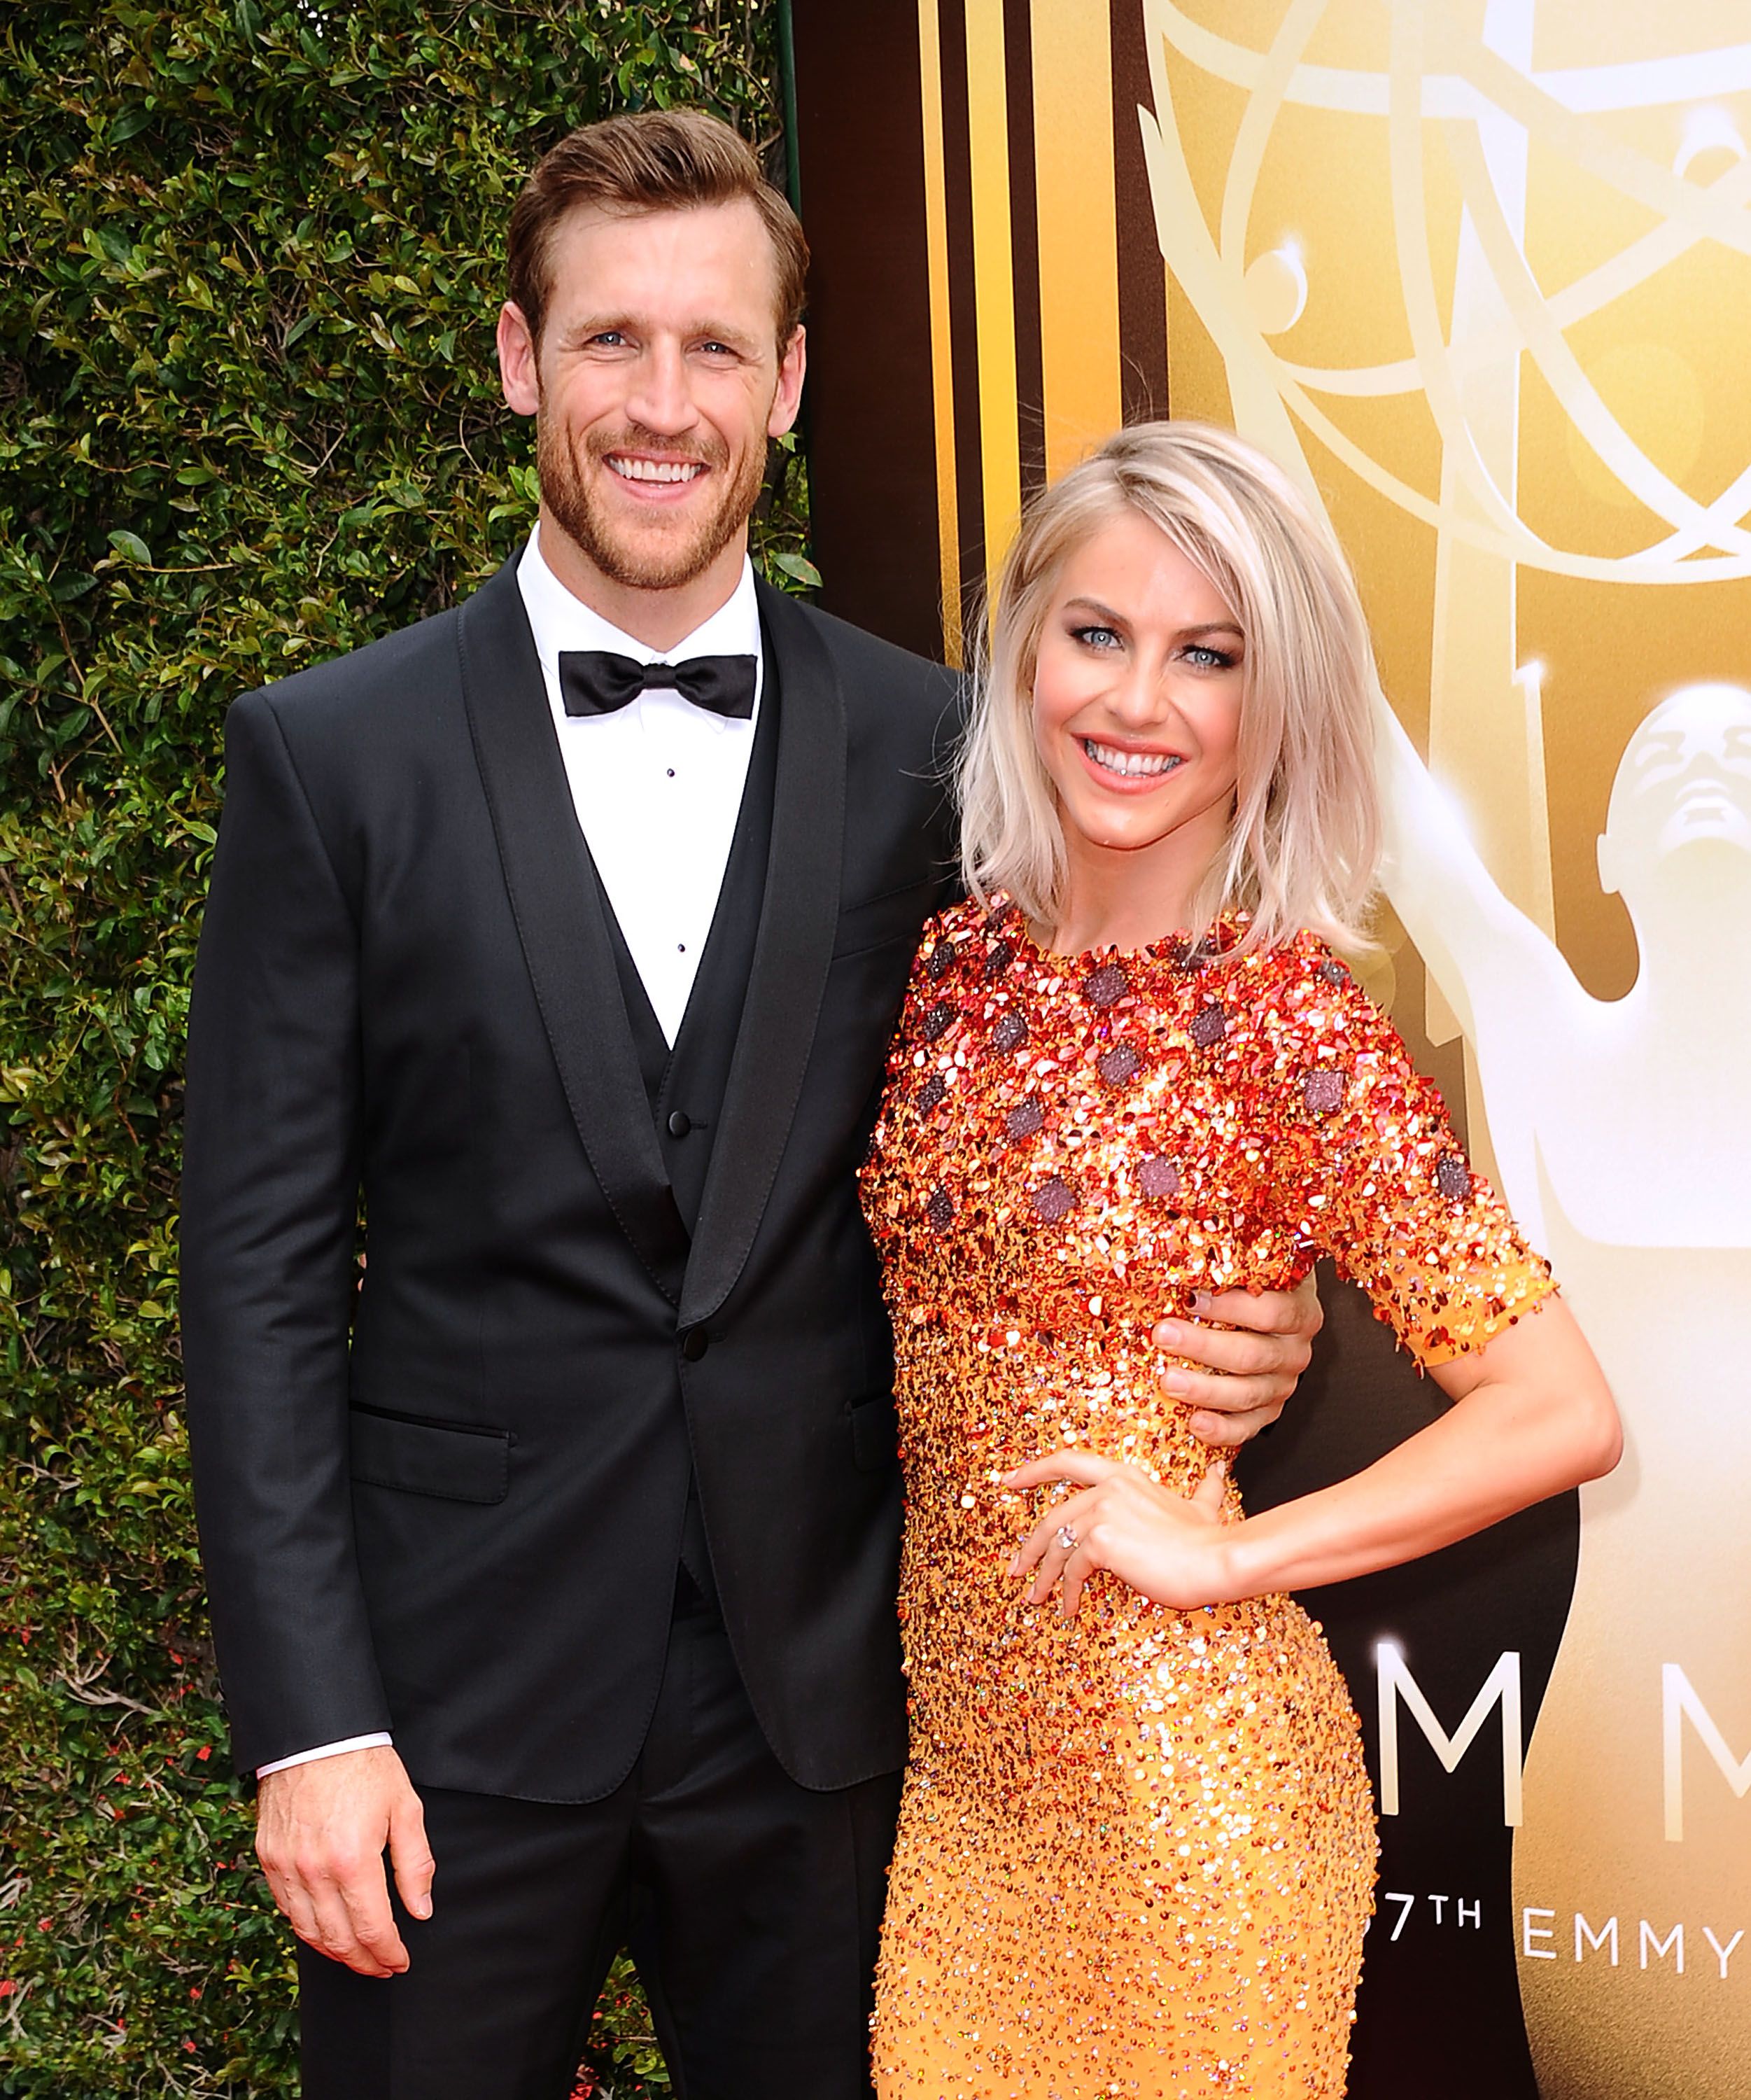 Brooks Laich and Julianne Hough at the 2015 Creative Arts Emmy Awards in 2015 in Los Angeles, California | Source: Getty Images